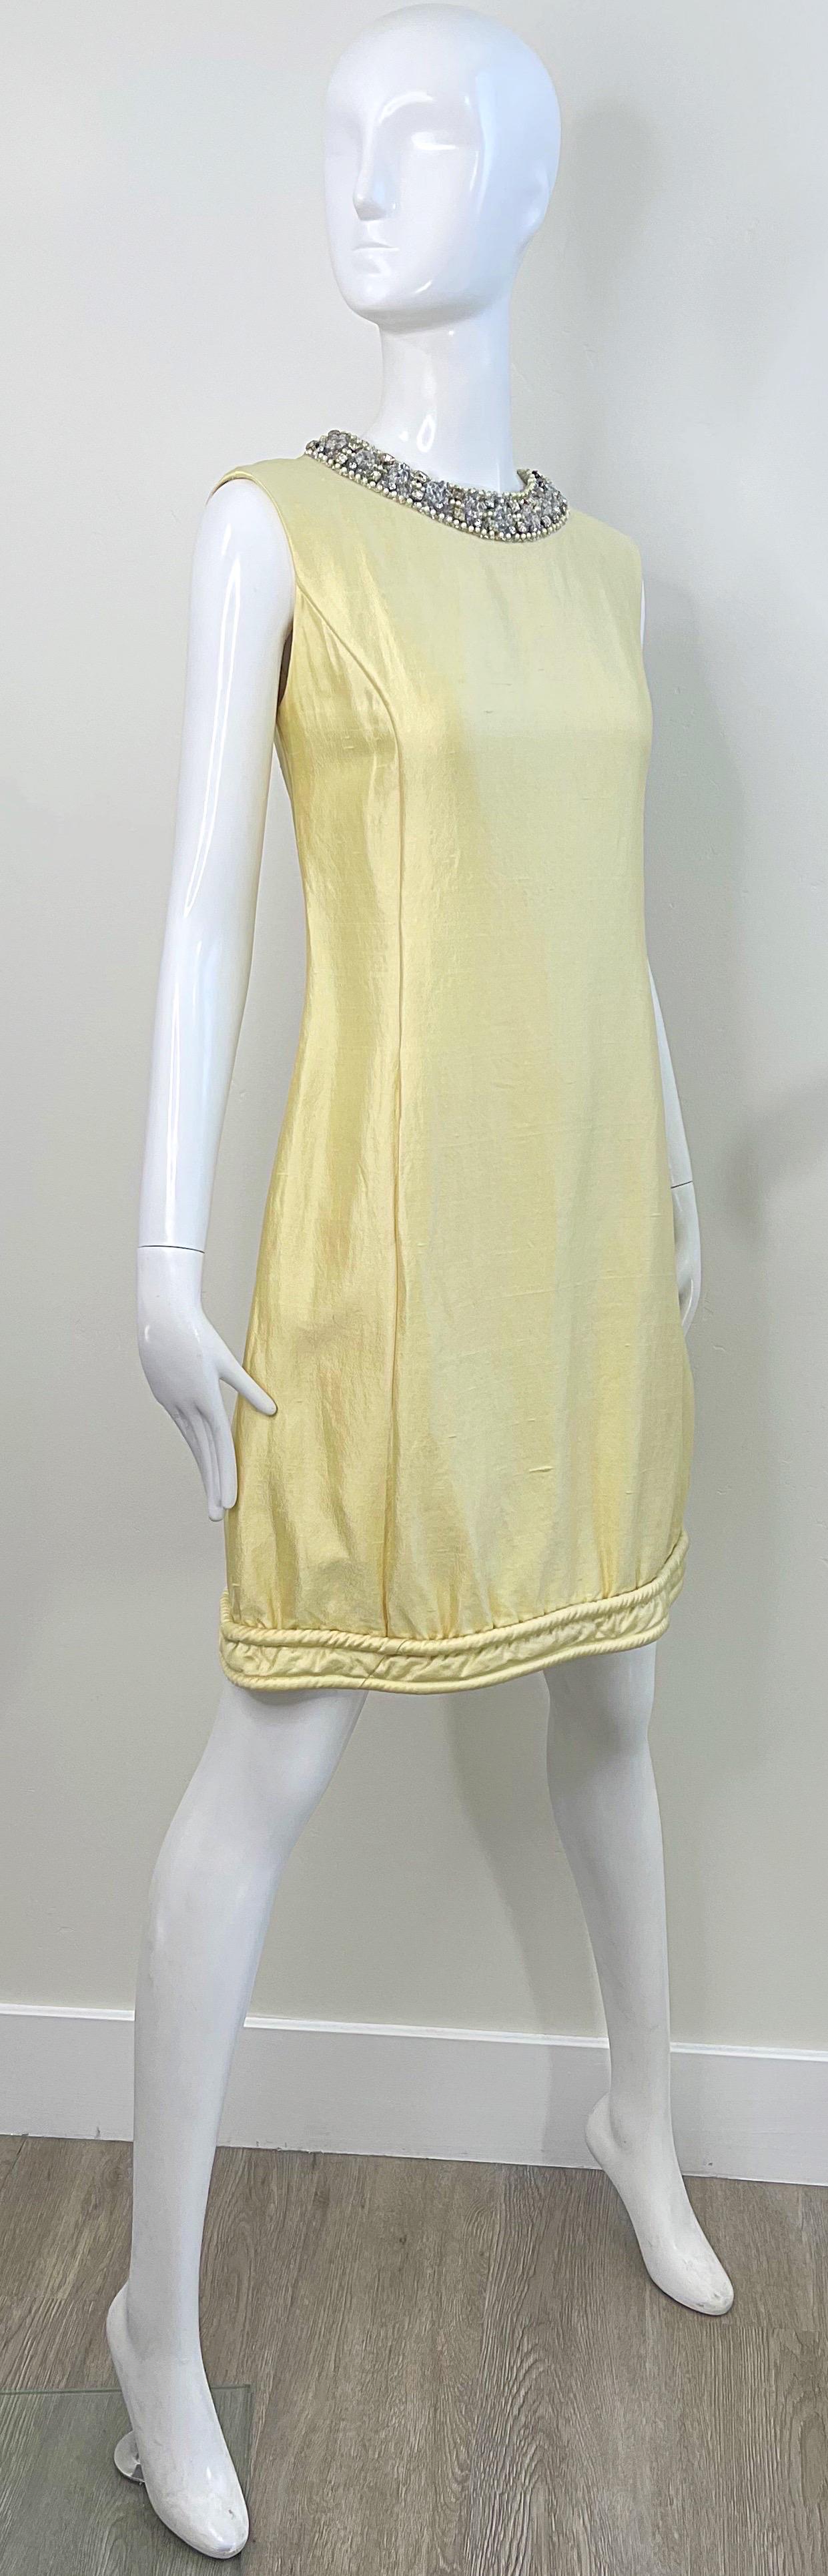 Chic 1960s Pale Yellow Silk Shantung Rhinestone Beaded Vintage 60s Shift Dress For Sale 3